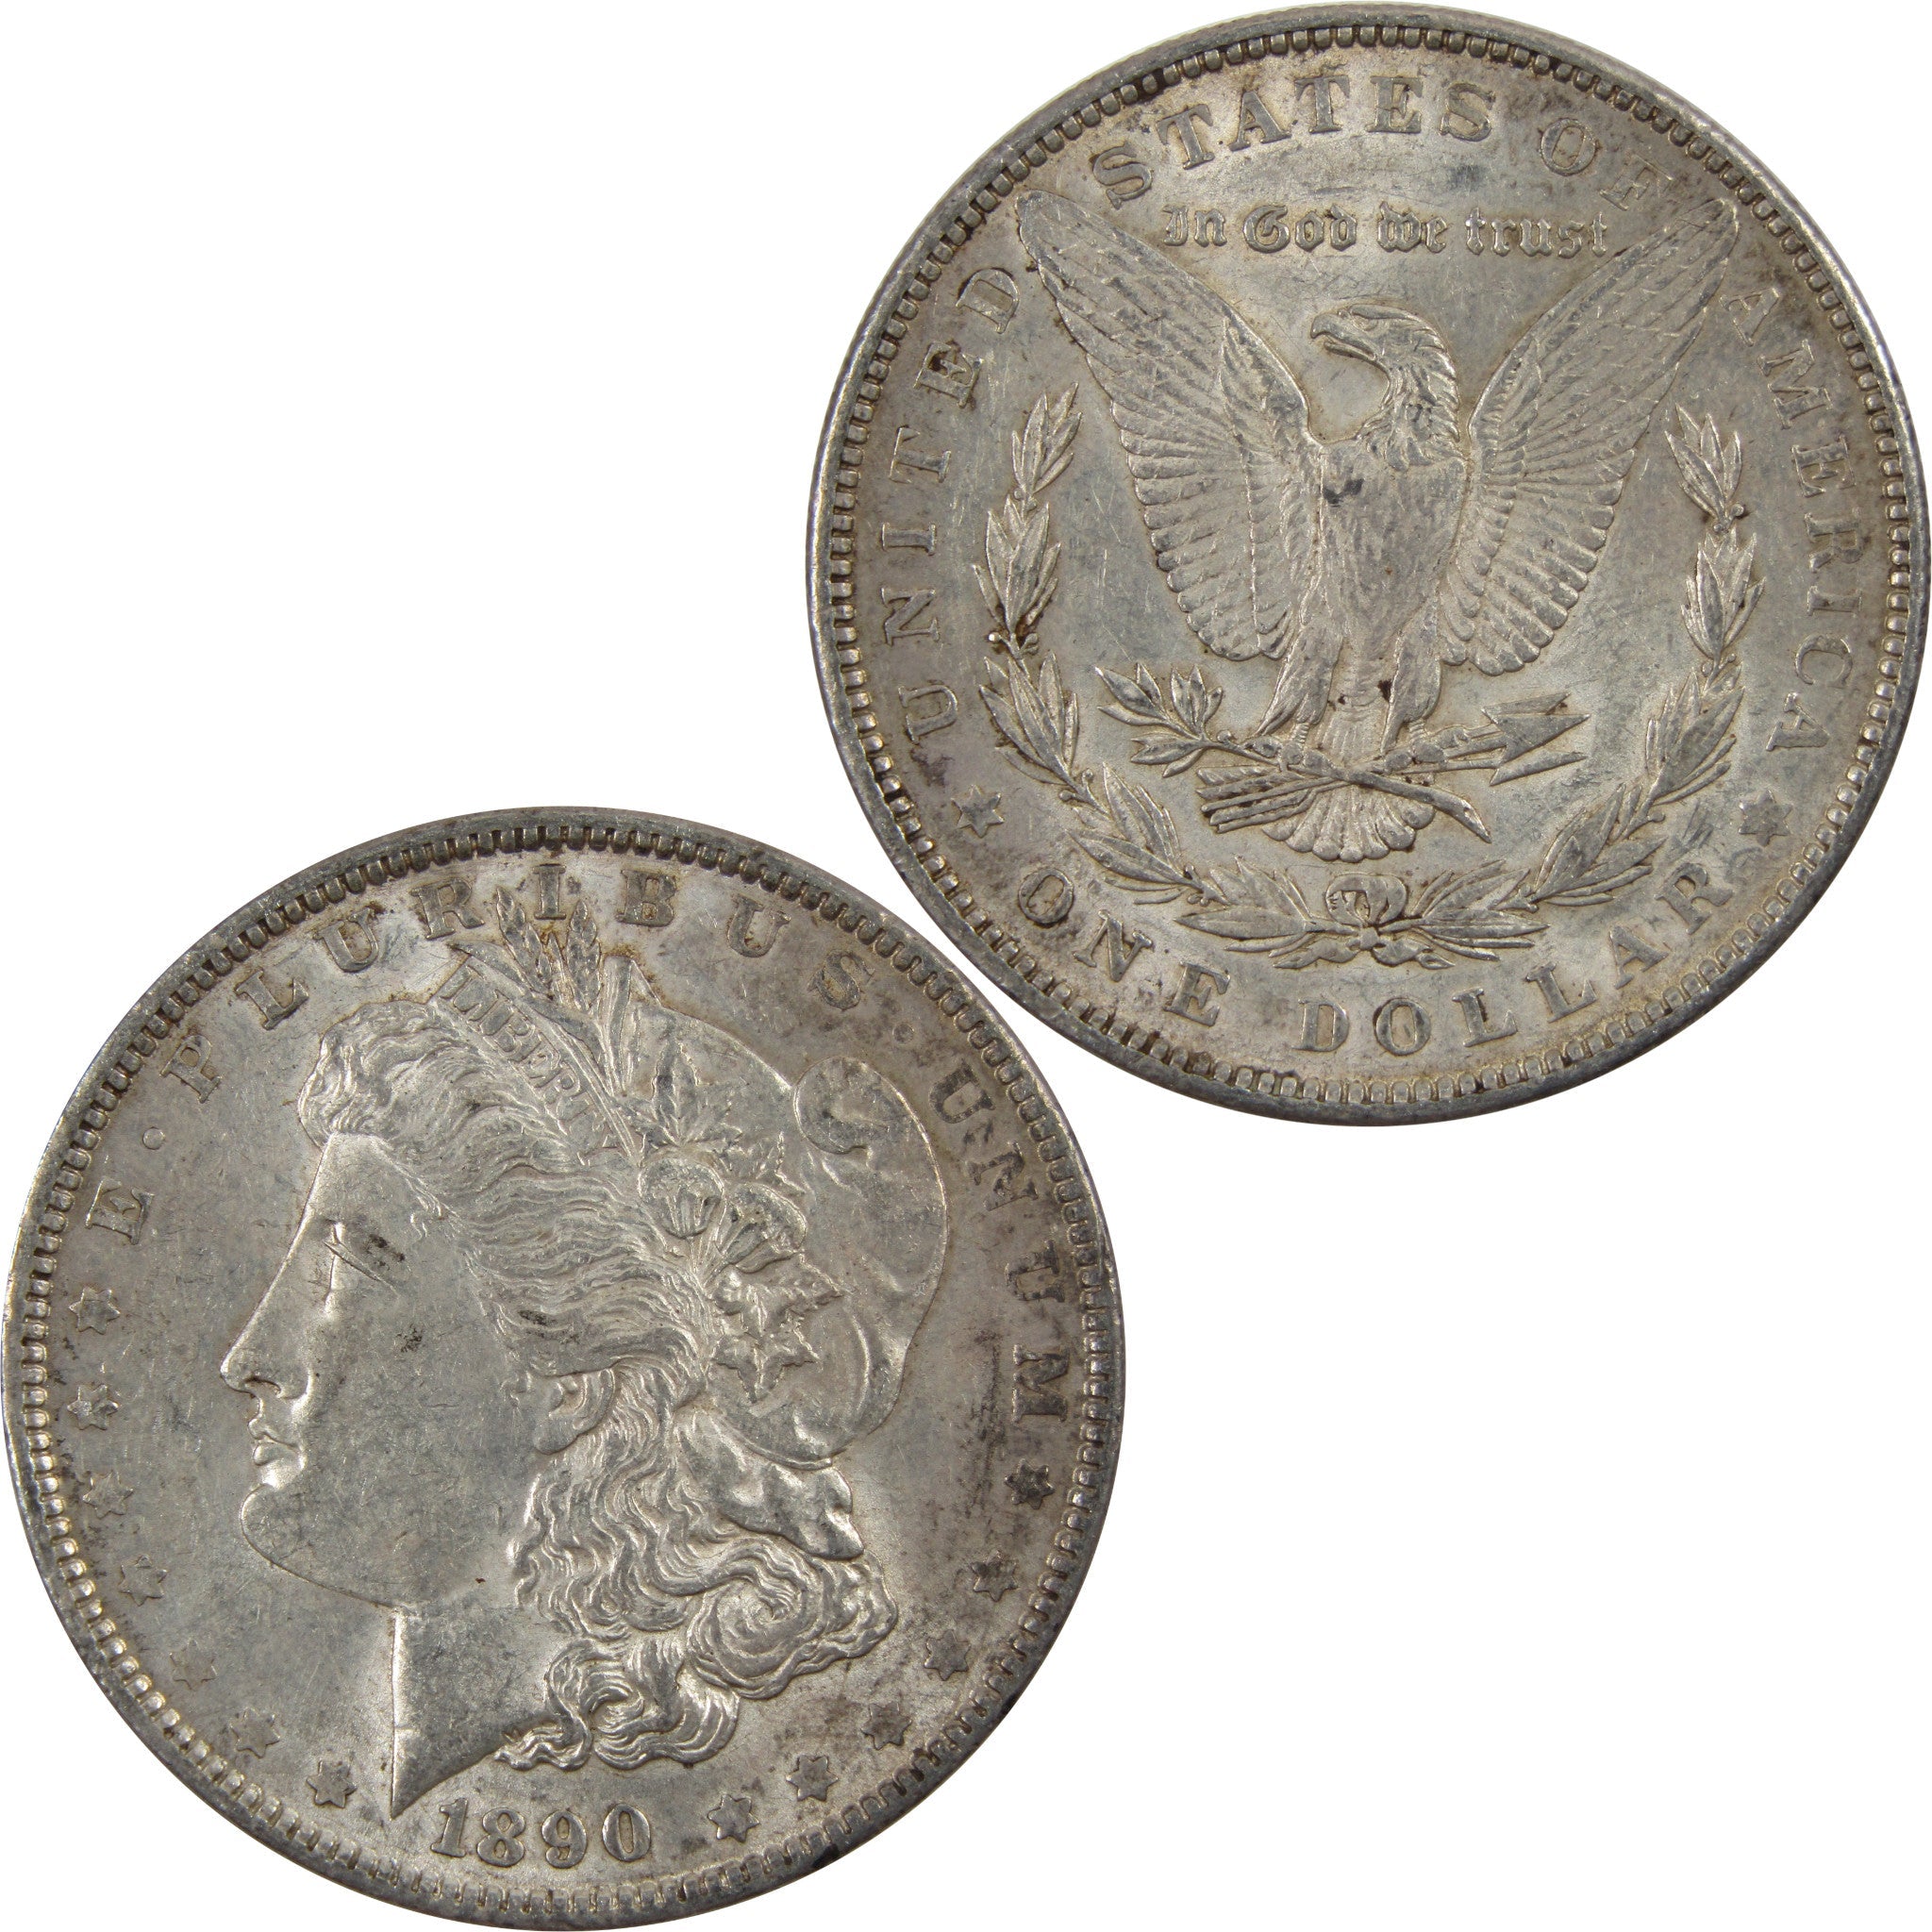 1890 Morgan Dollar AU About Uncirculated 90% Silver $1 Coin SKU:I5463 - Morgan coin - Morgan silver dollar - Morgan silver dollar for sale - Profile Coins &amp; Collectibles